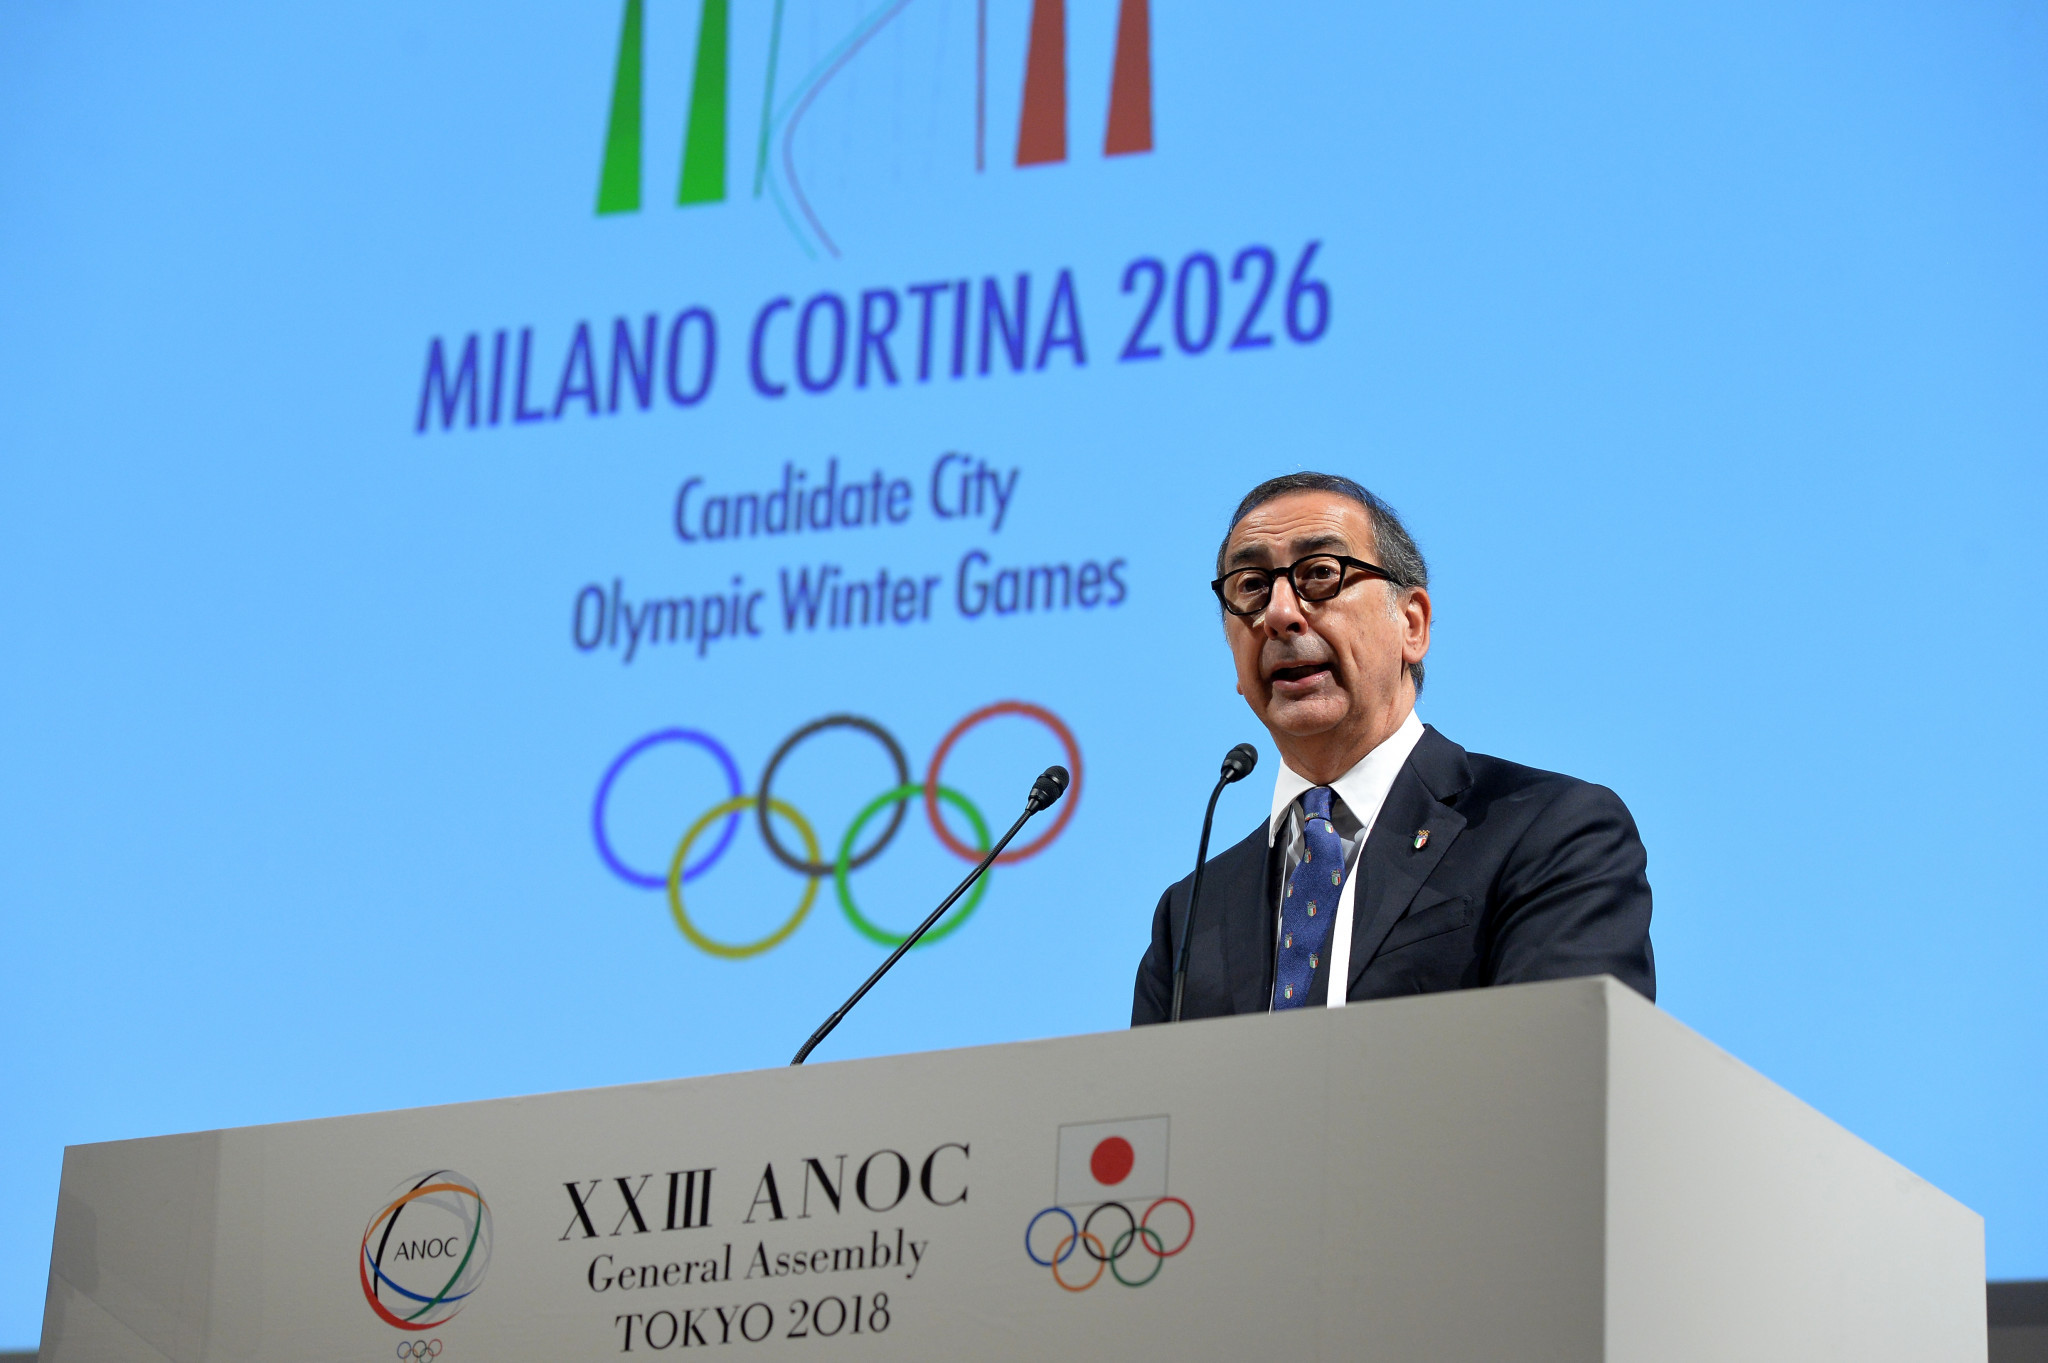 Stockholm Åre in a two-horse race for the 2026 Winter Olympic Games with Milan Cortina ©Getty Images